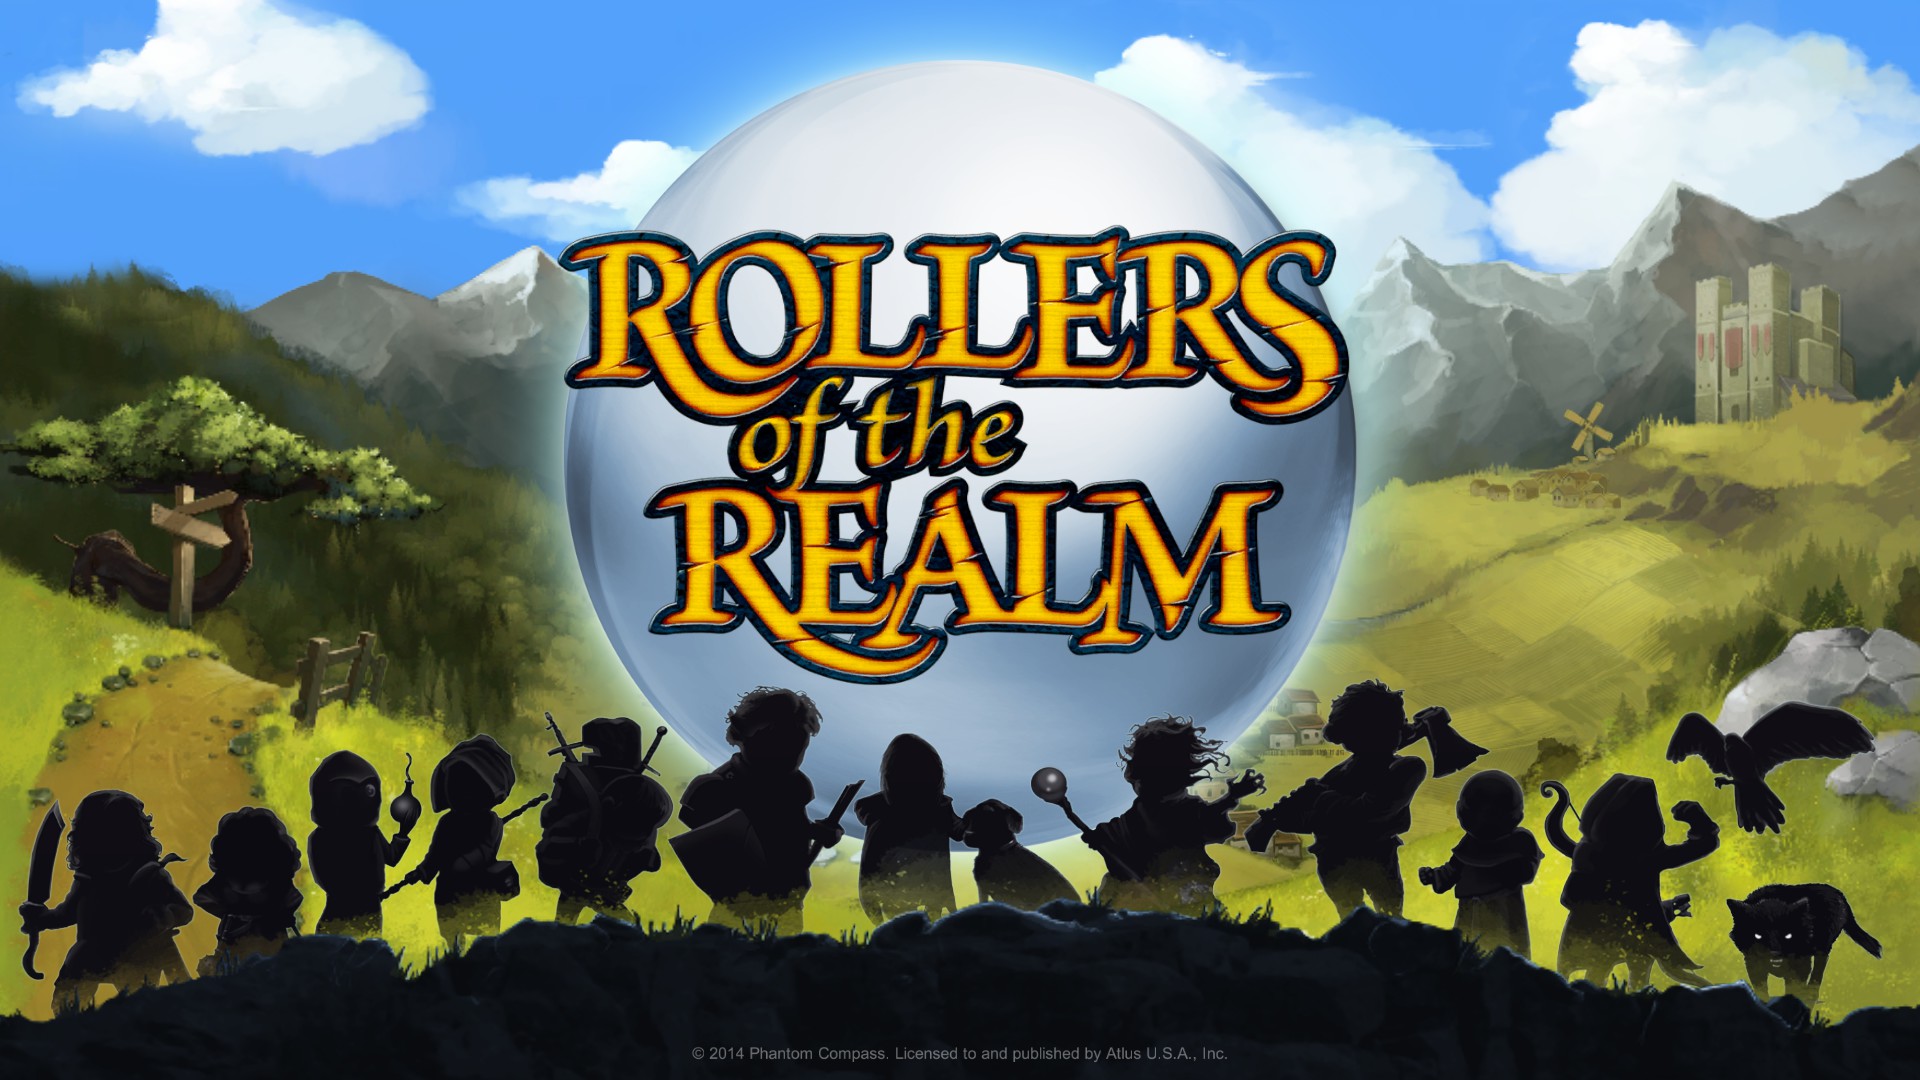 IM1183: Rollers of the Realm